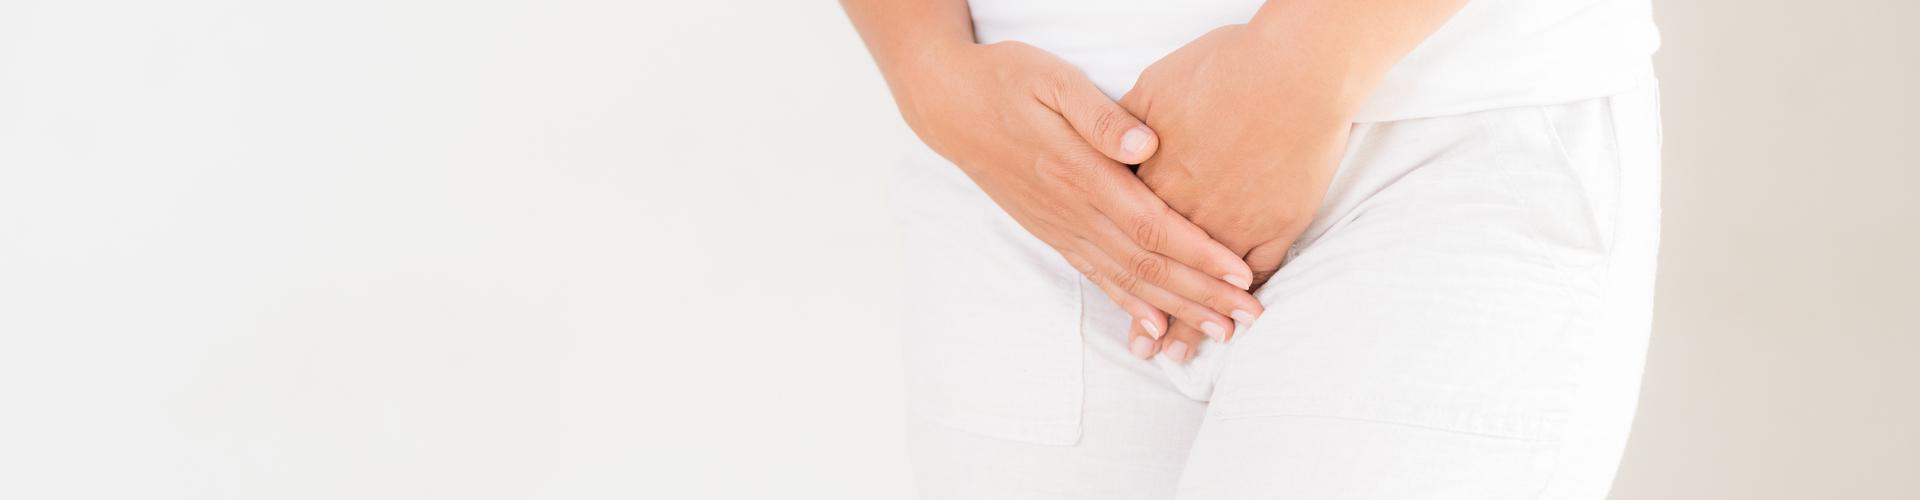 Microbiote vaginal infection urinaire